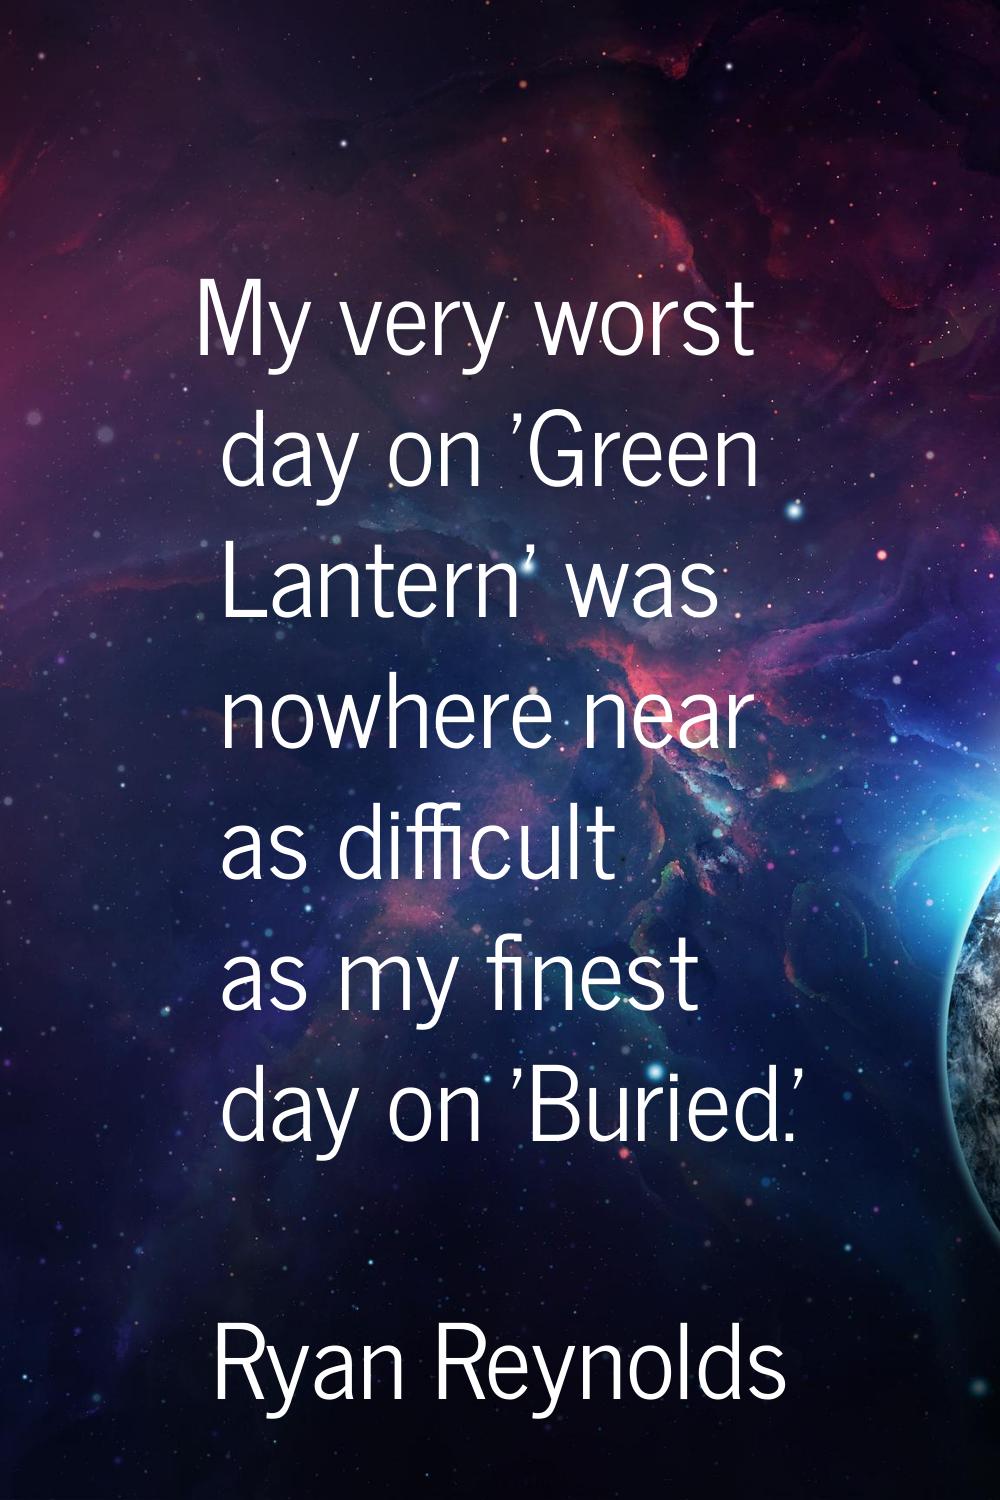 My very worst day on 'Green Lantern' was nowhere near as difficult as my finest day on 'Buried.'